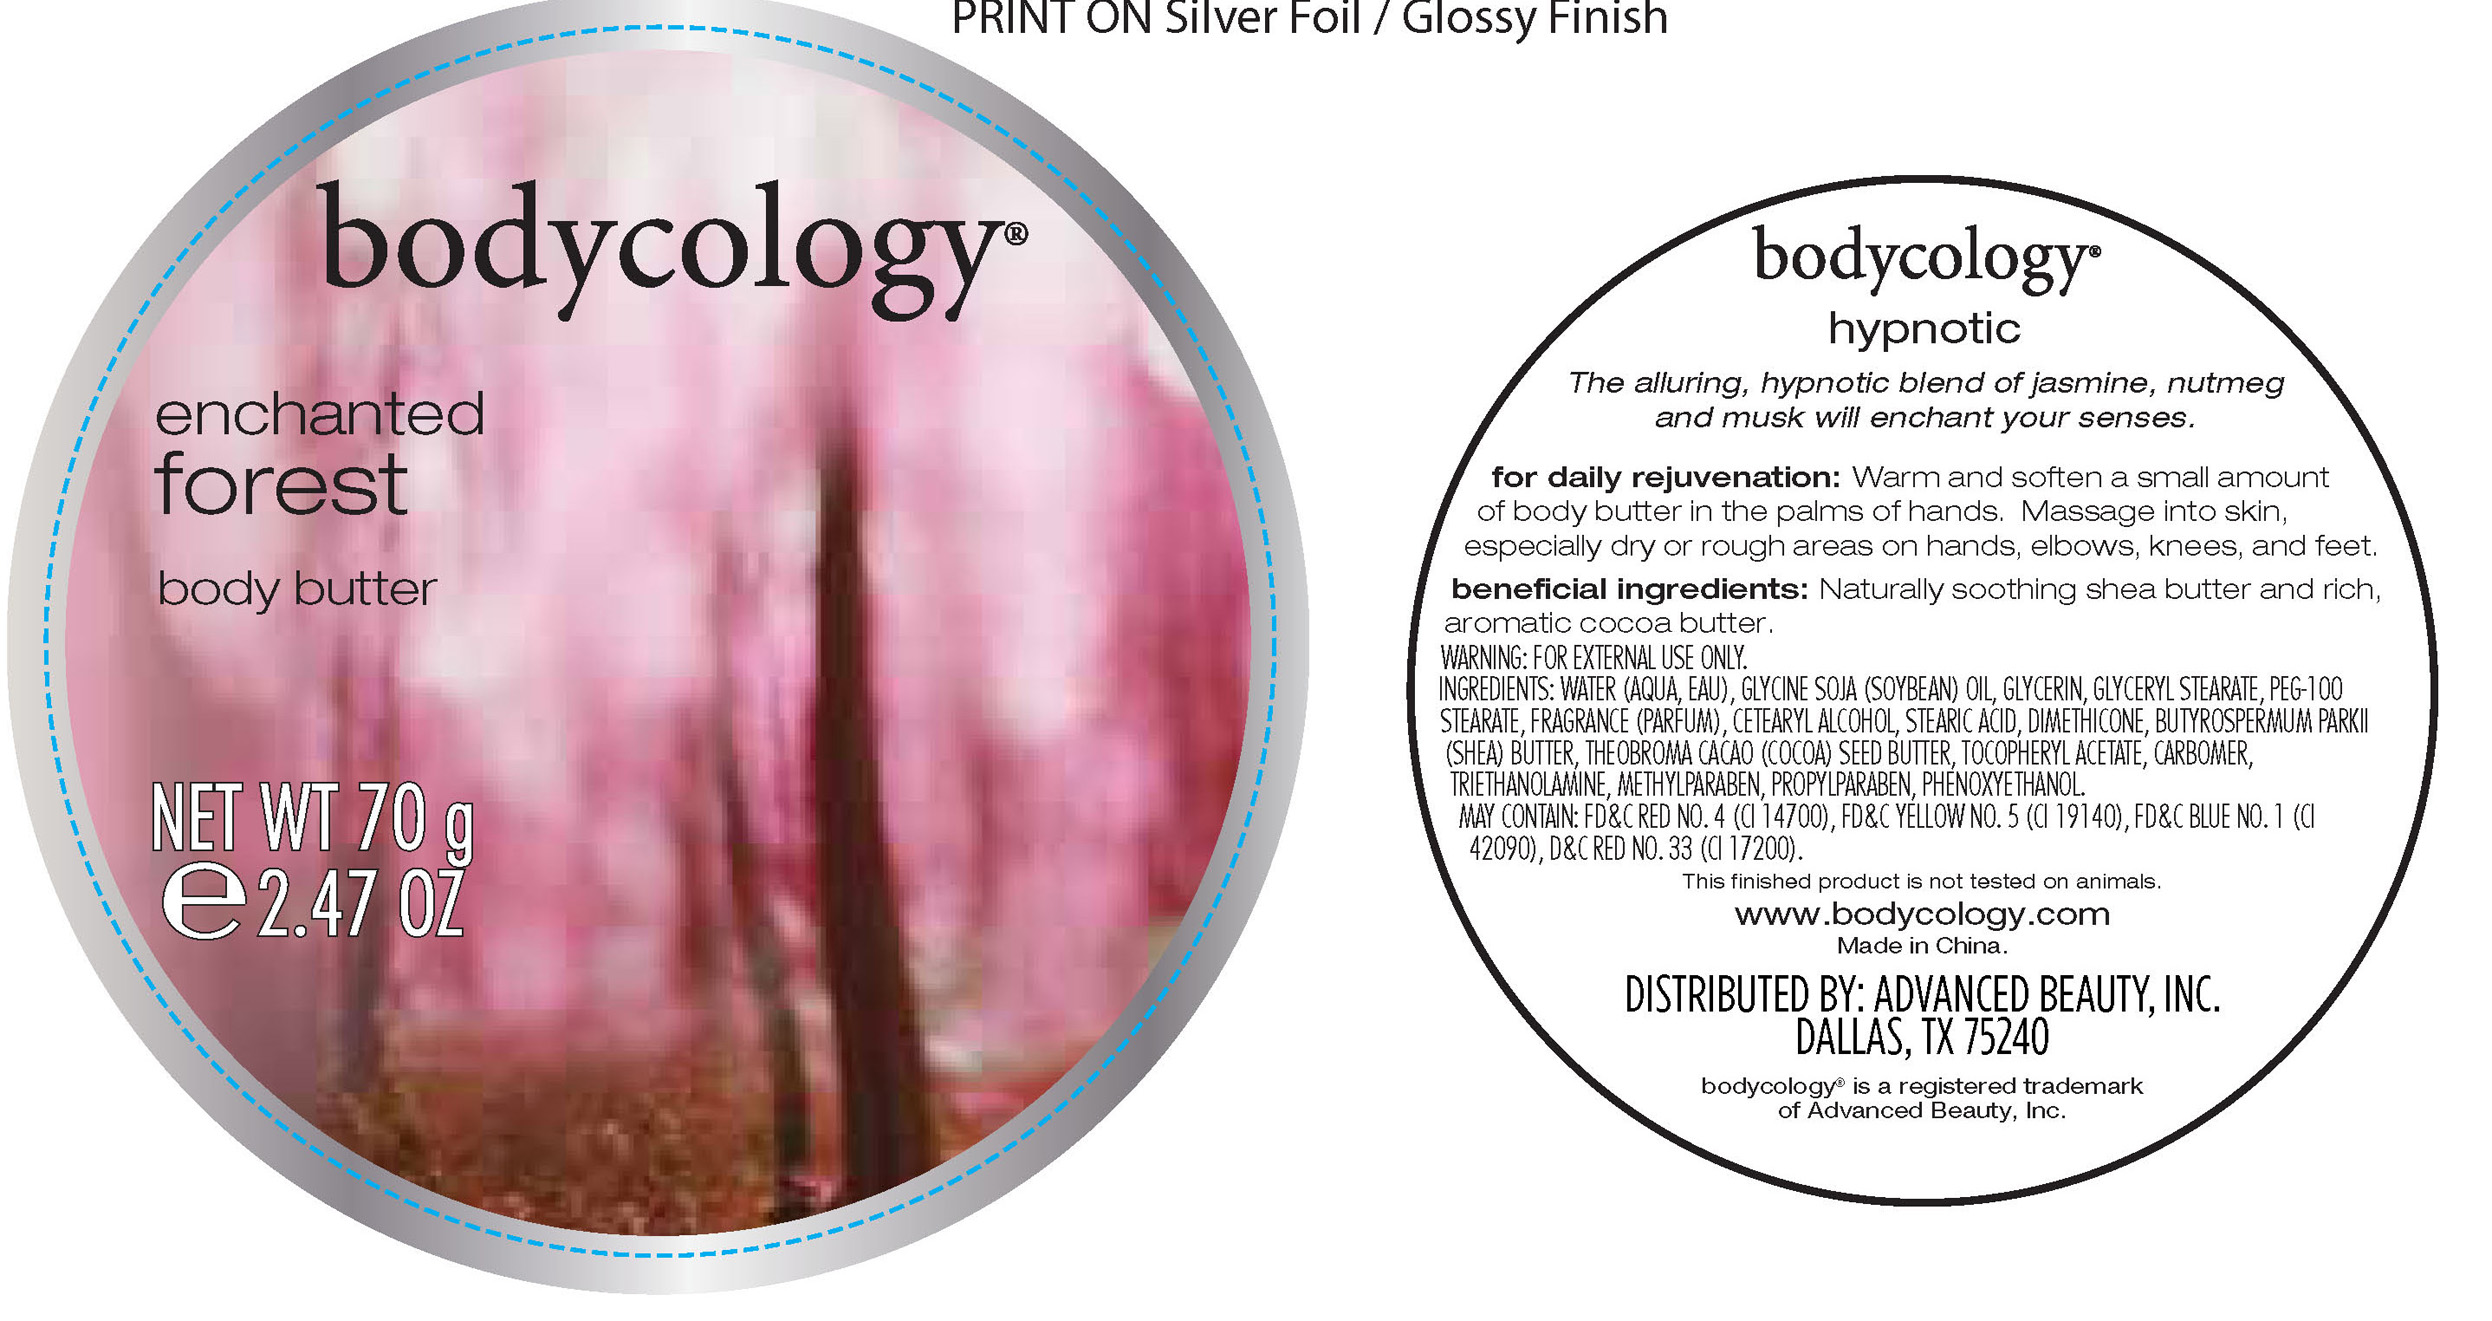 bodycology-enchanted-forest-kit-enchanted-forest-kit